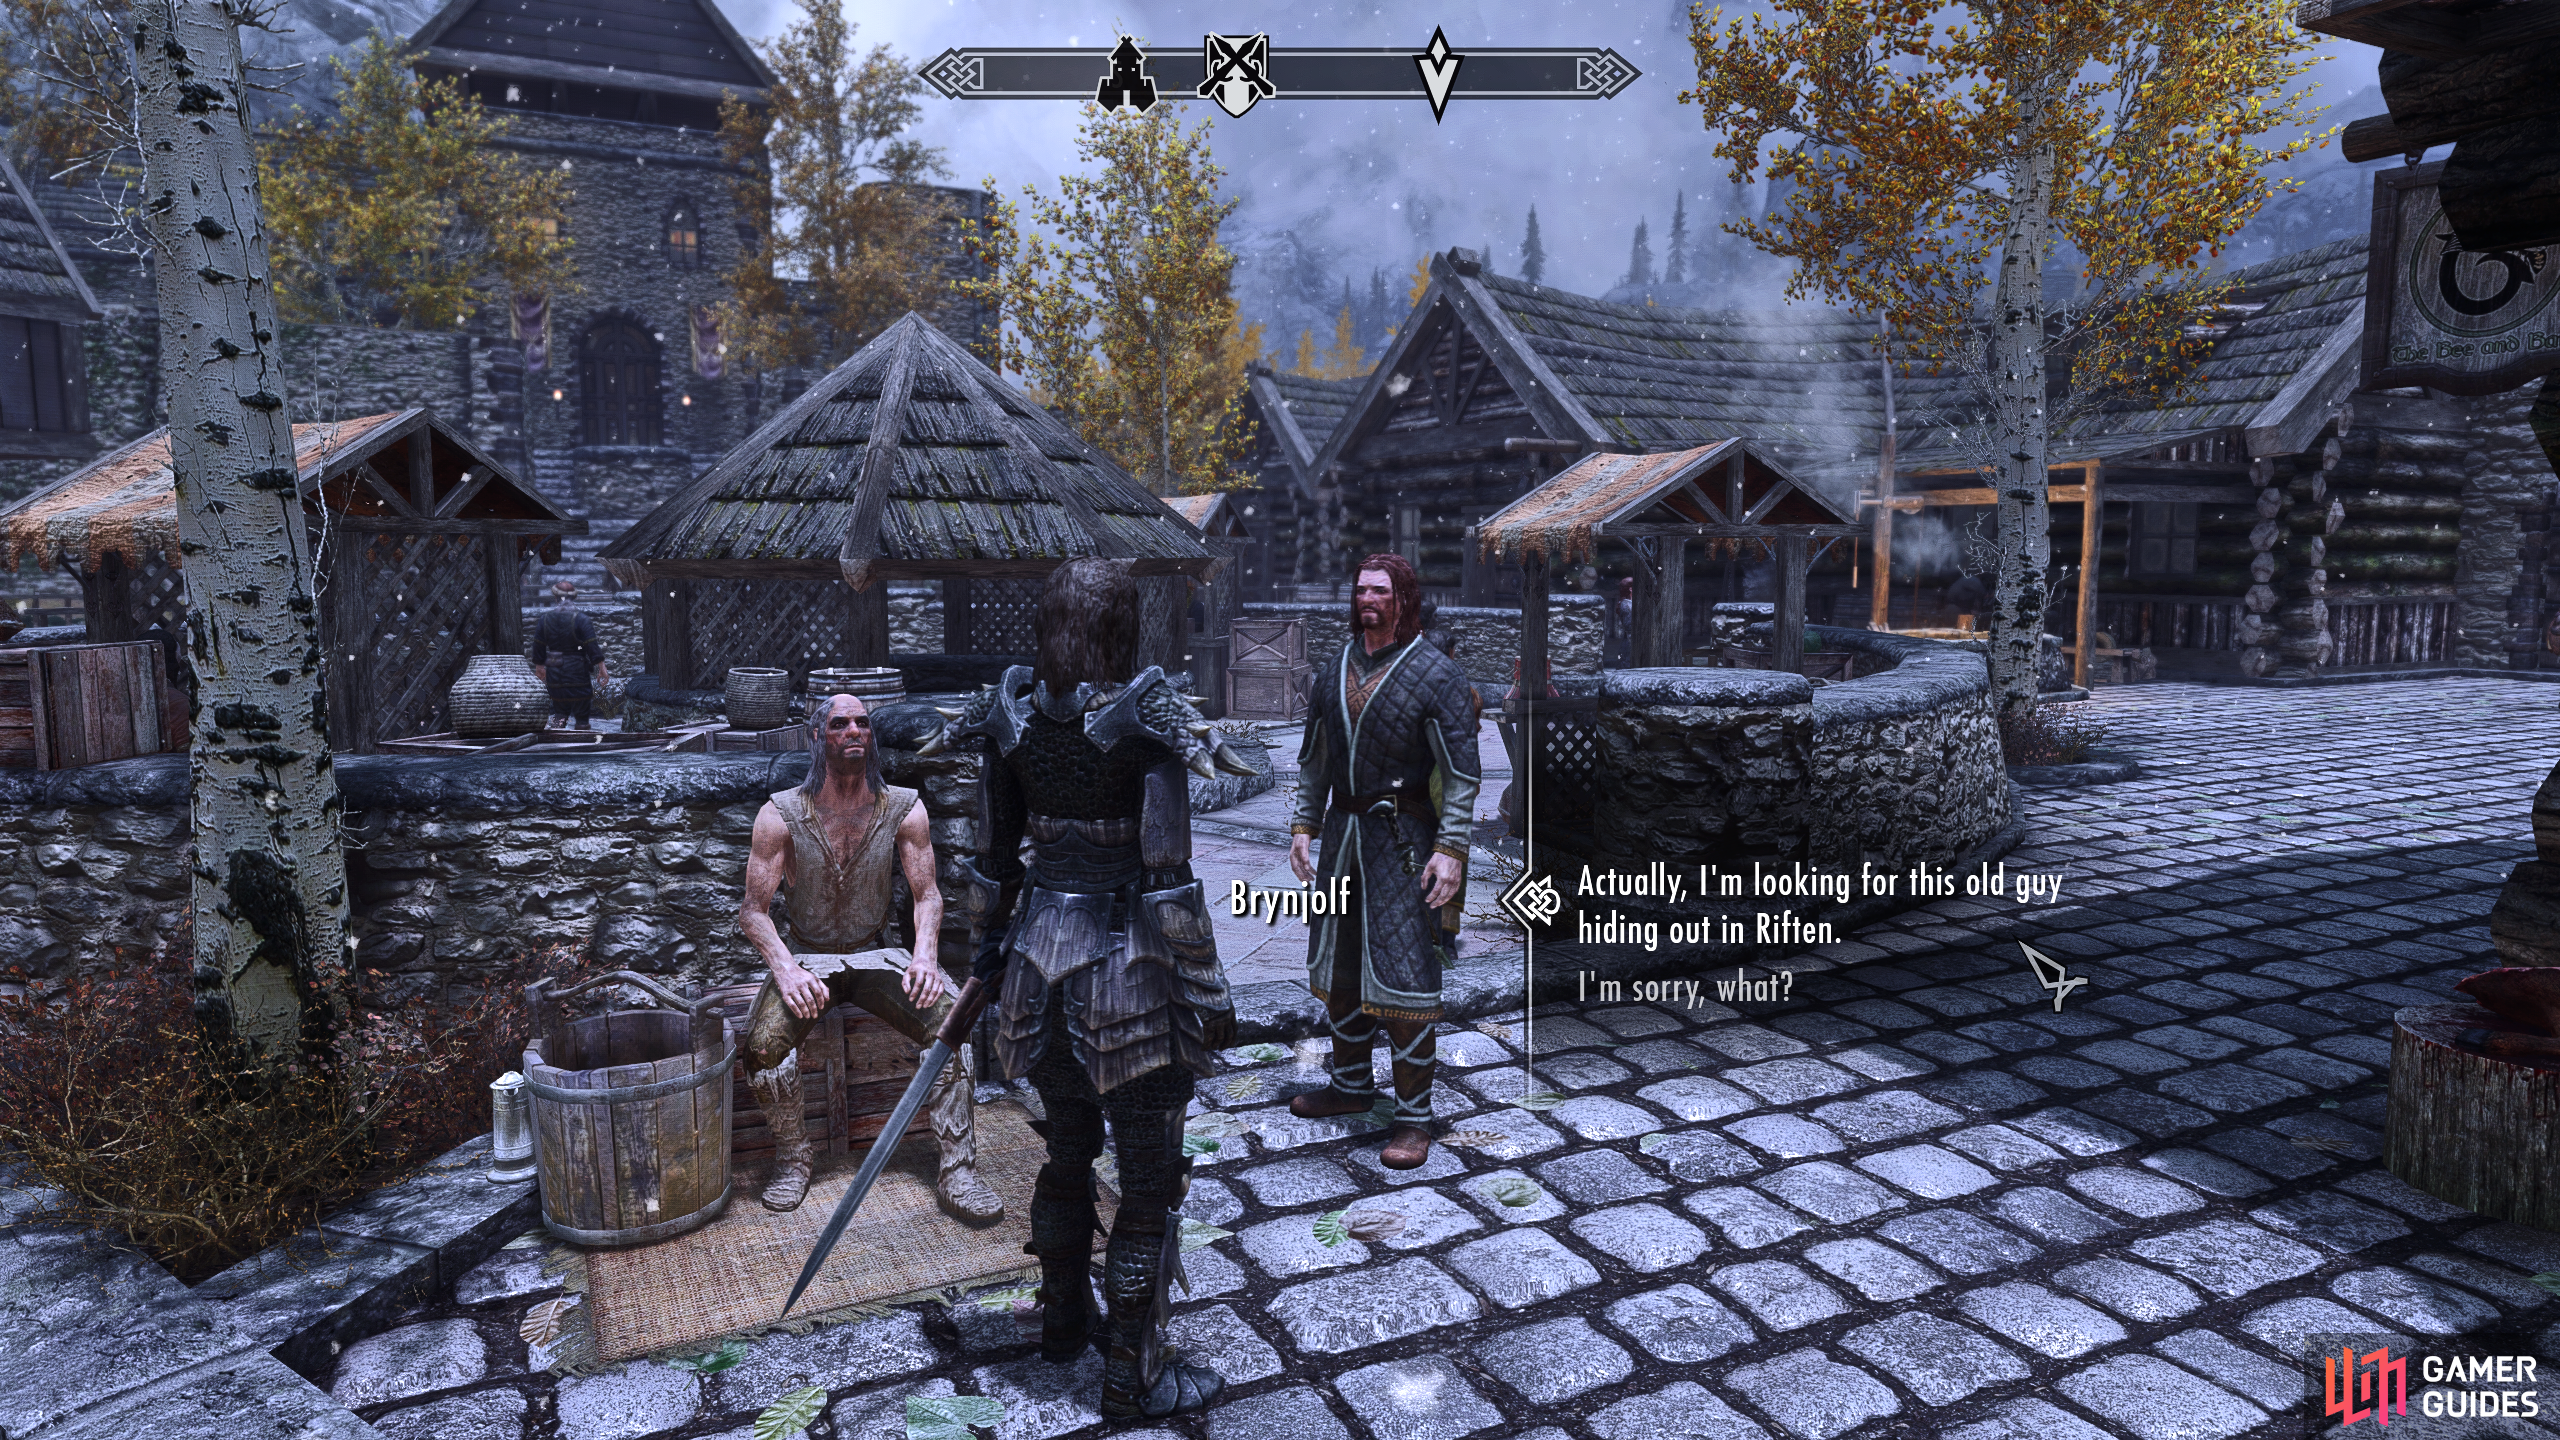 You can speak with Brynjolf near the marketplace to advance the quest.